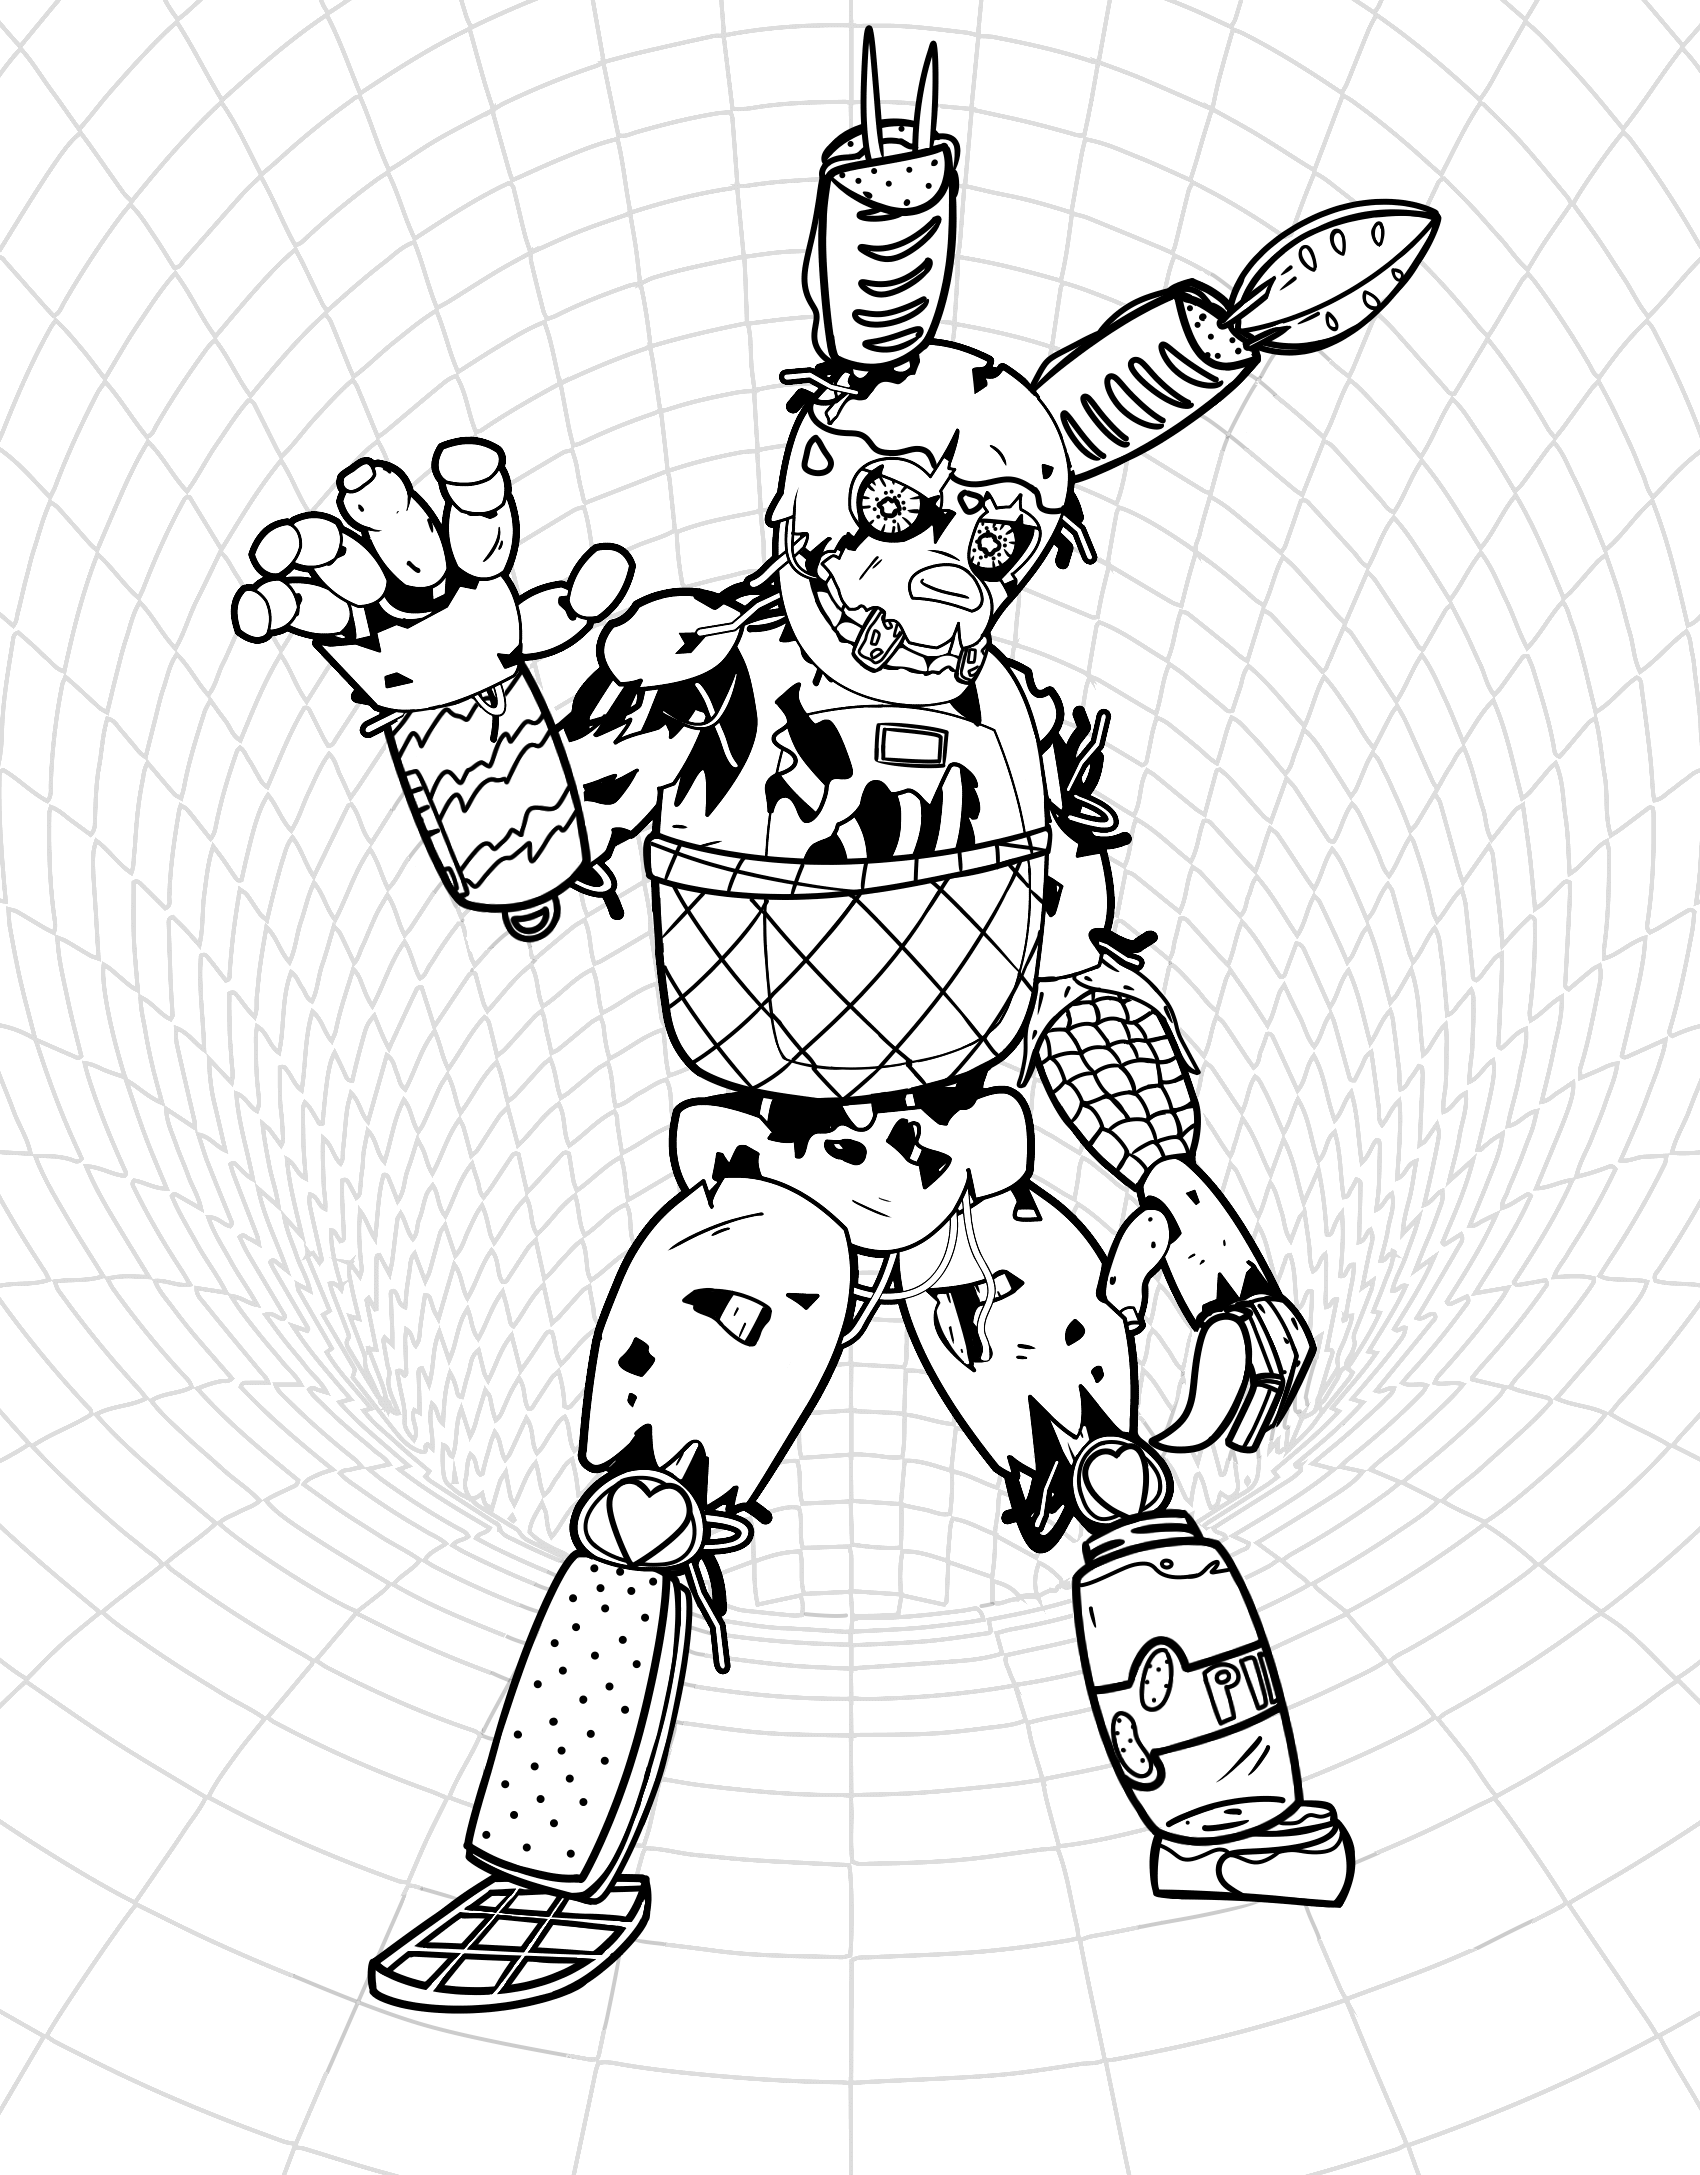 Snaktrap Edited Out Of The Springtrap Coloring Page From The Official